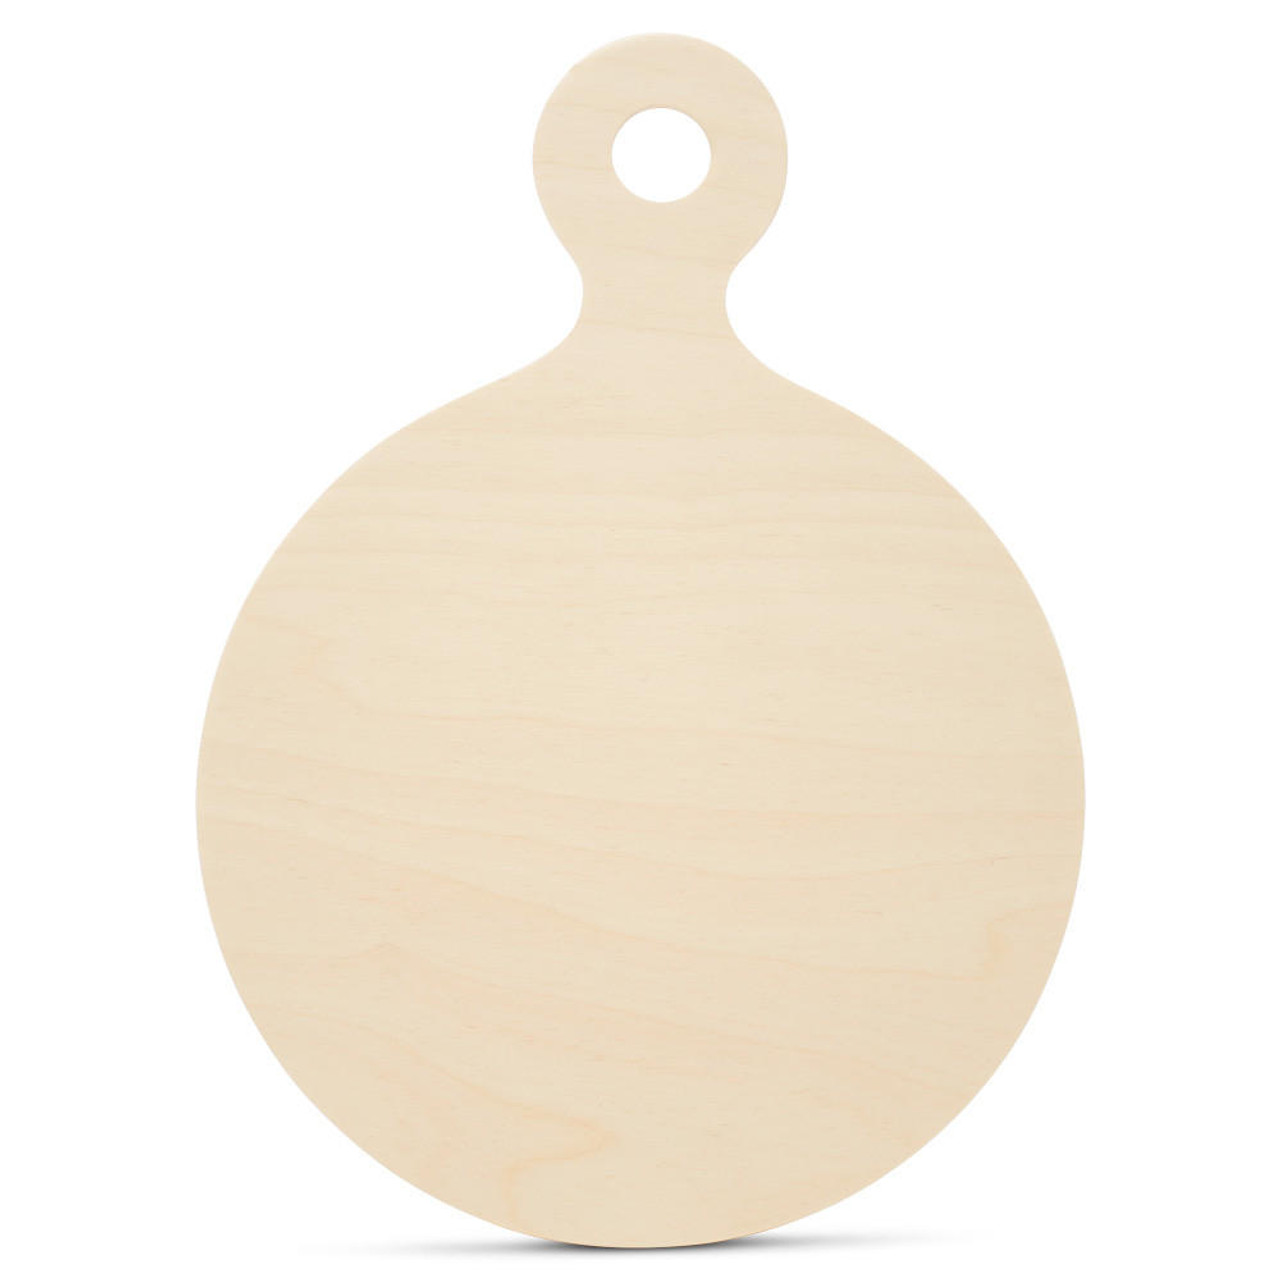 Plywood and Cutouts - Wood Cutting Board Shapes - Woodpeckers Crafts